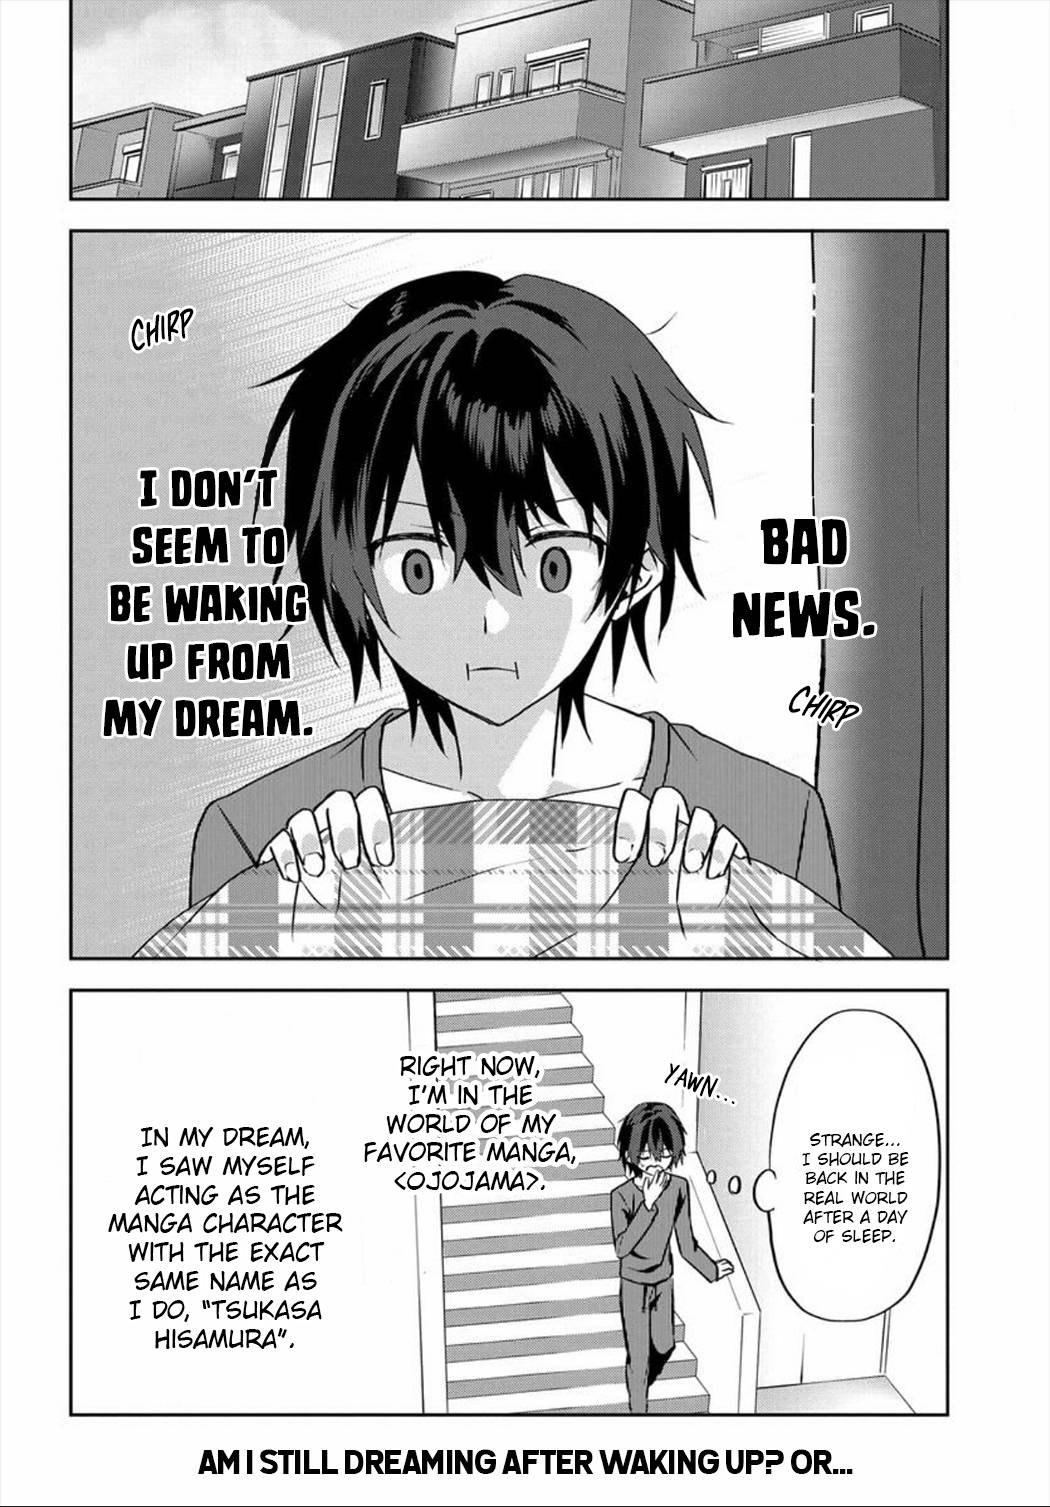 Since I’Ve Entered The World Of Romantic Comedy Manga, I’Ll Do My Best To Make The Losing Heroine Happy - chapter 2.2 - #1